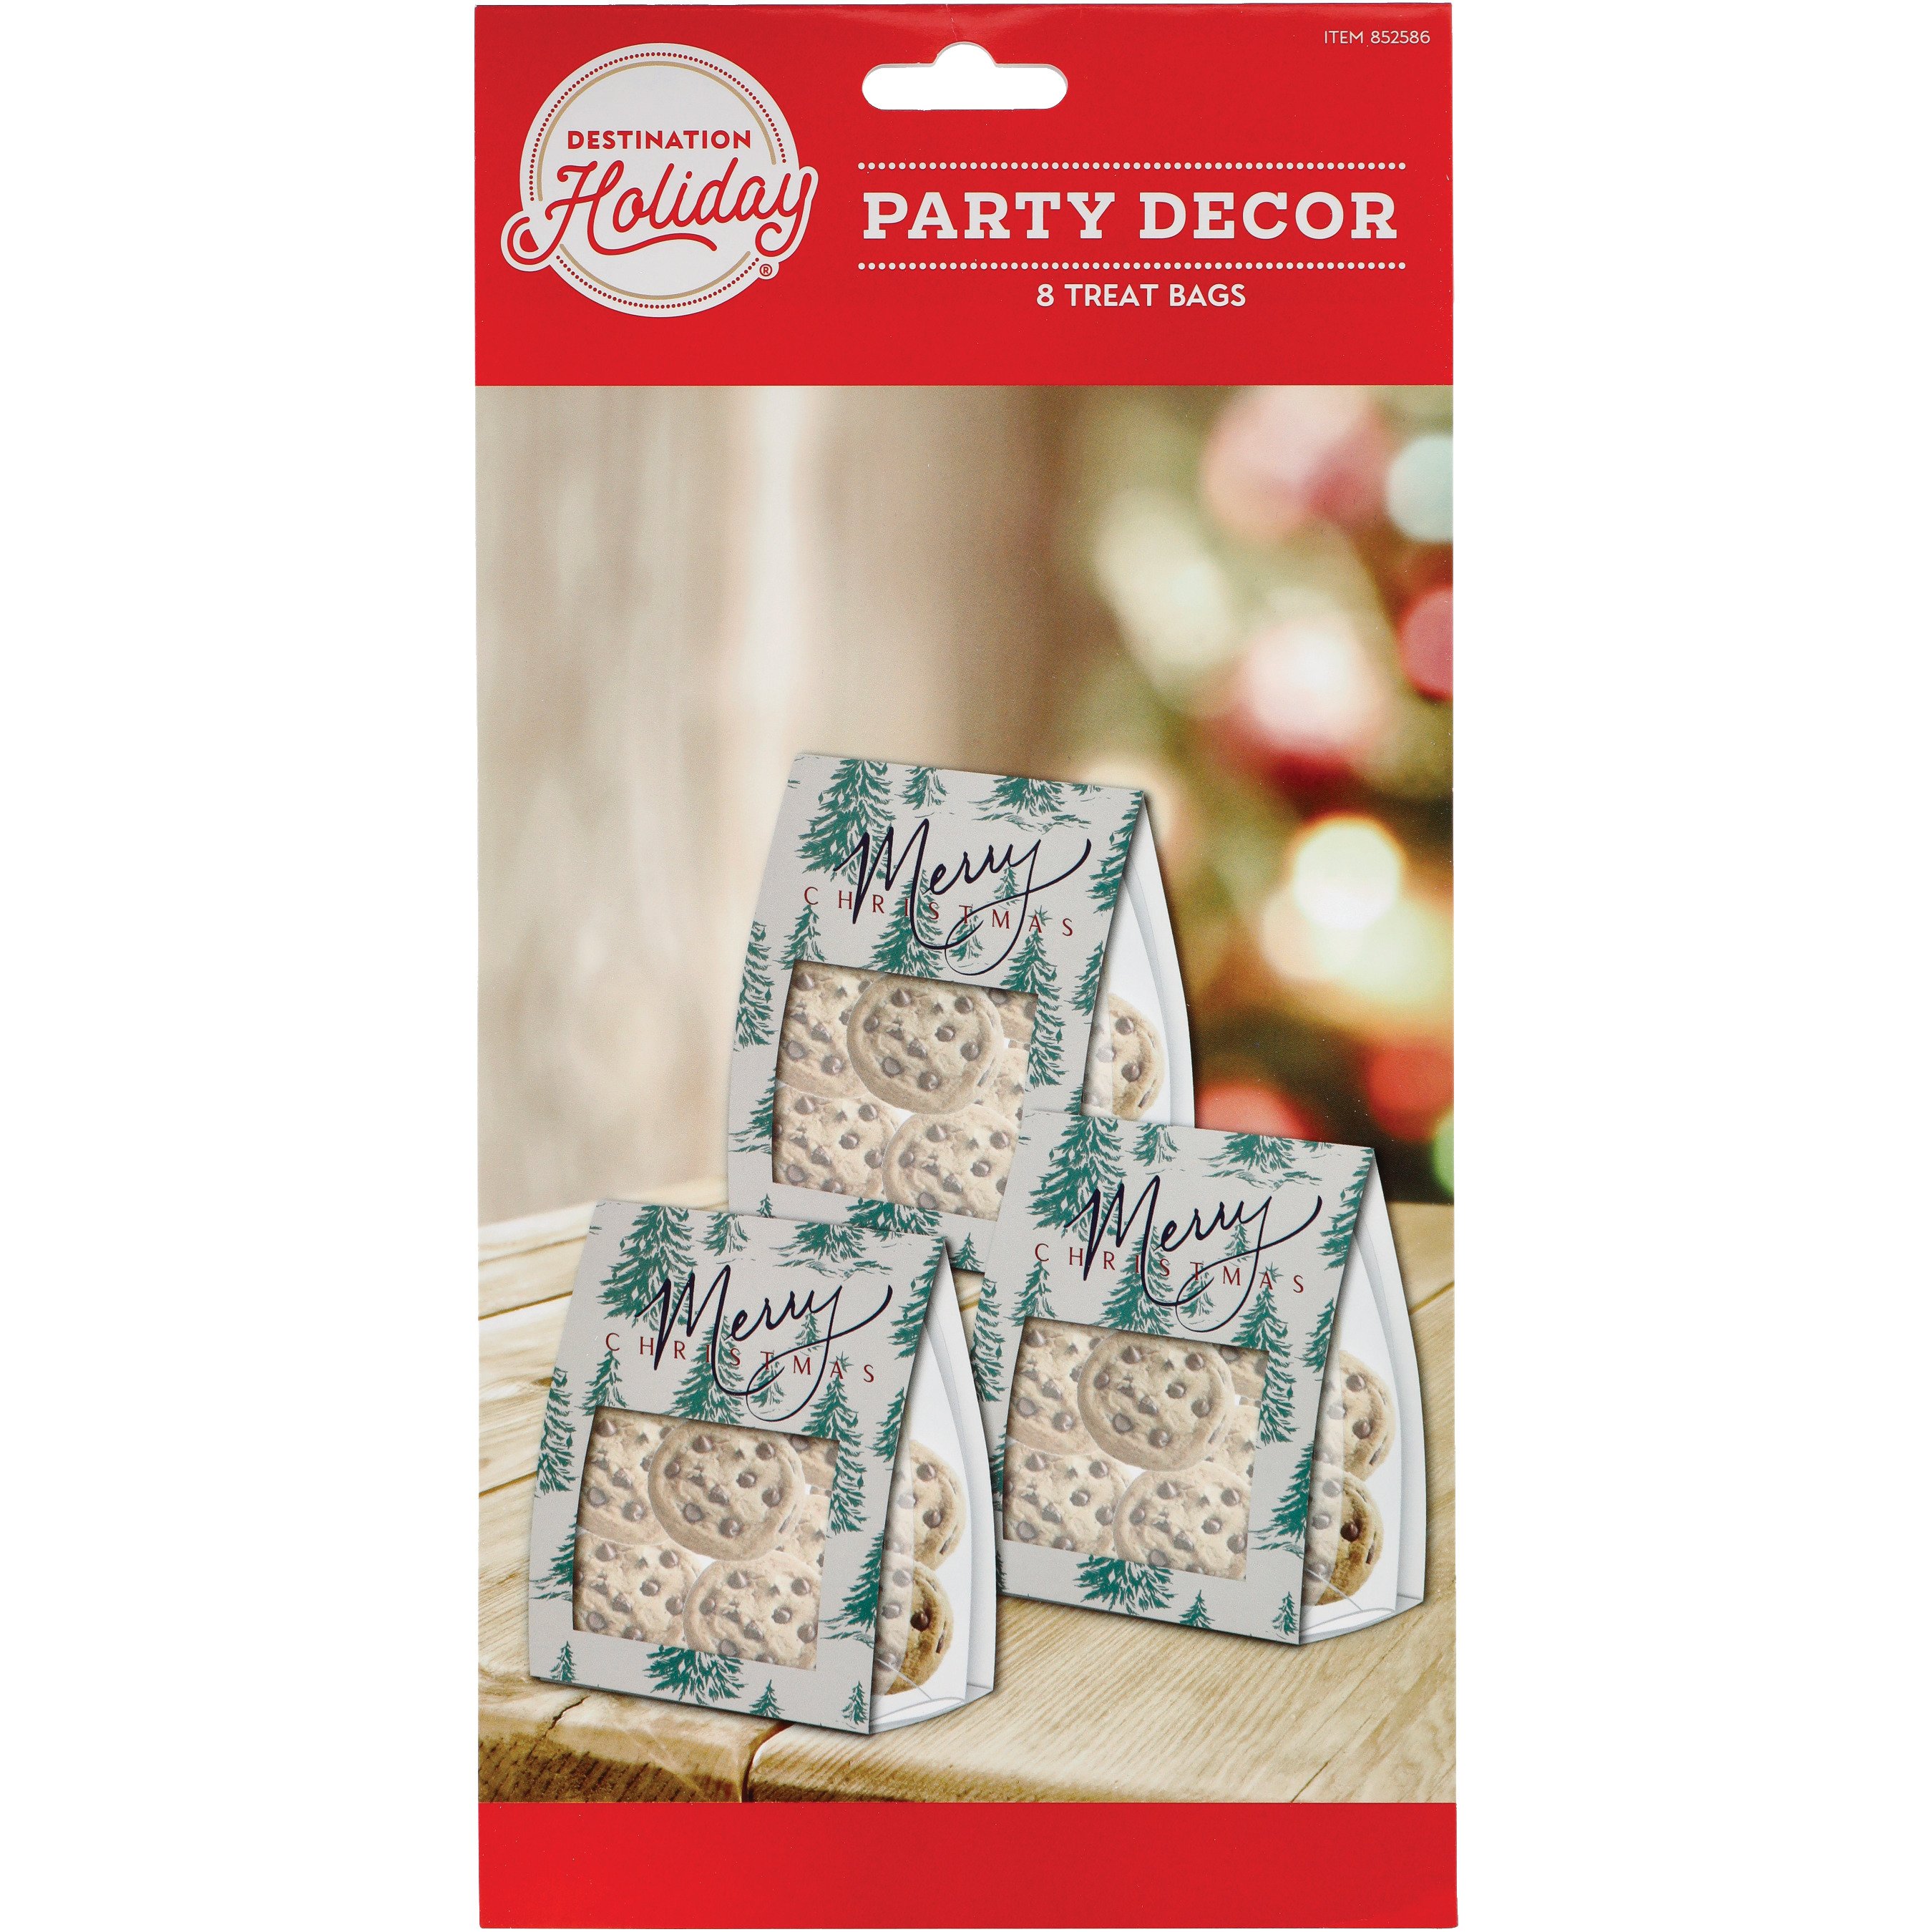 Destination Holiday Merry Christmas Treat Bags - Shop Party Decor at H-E-B